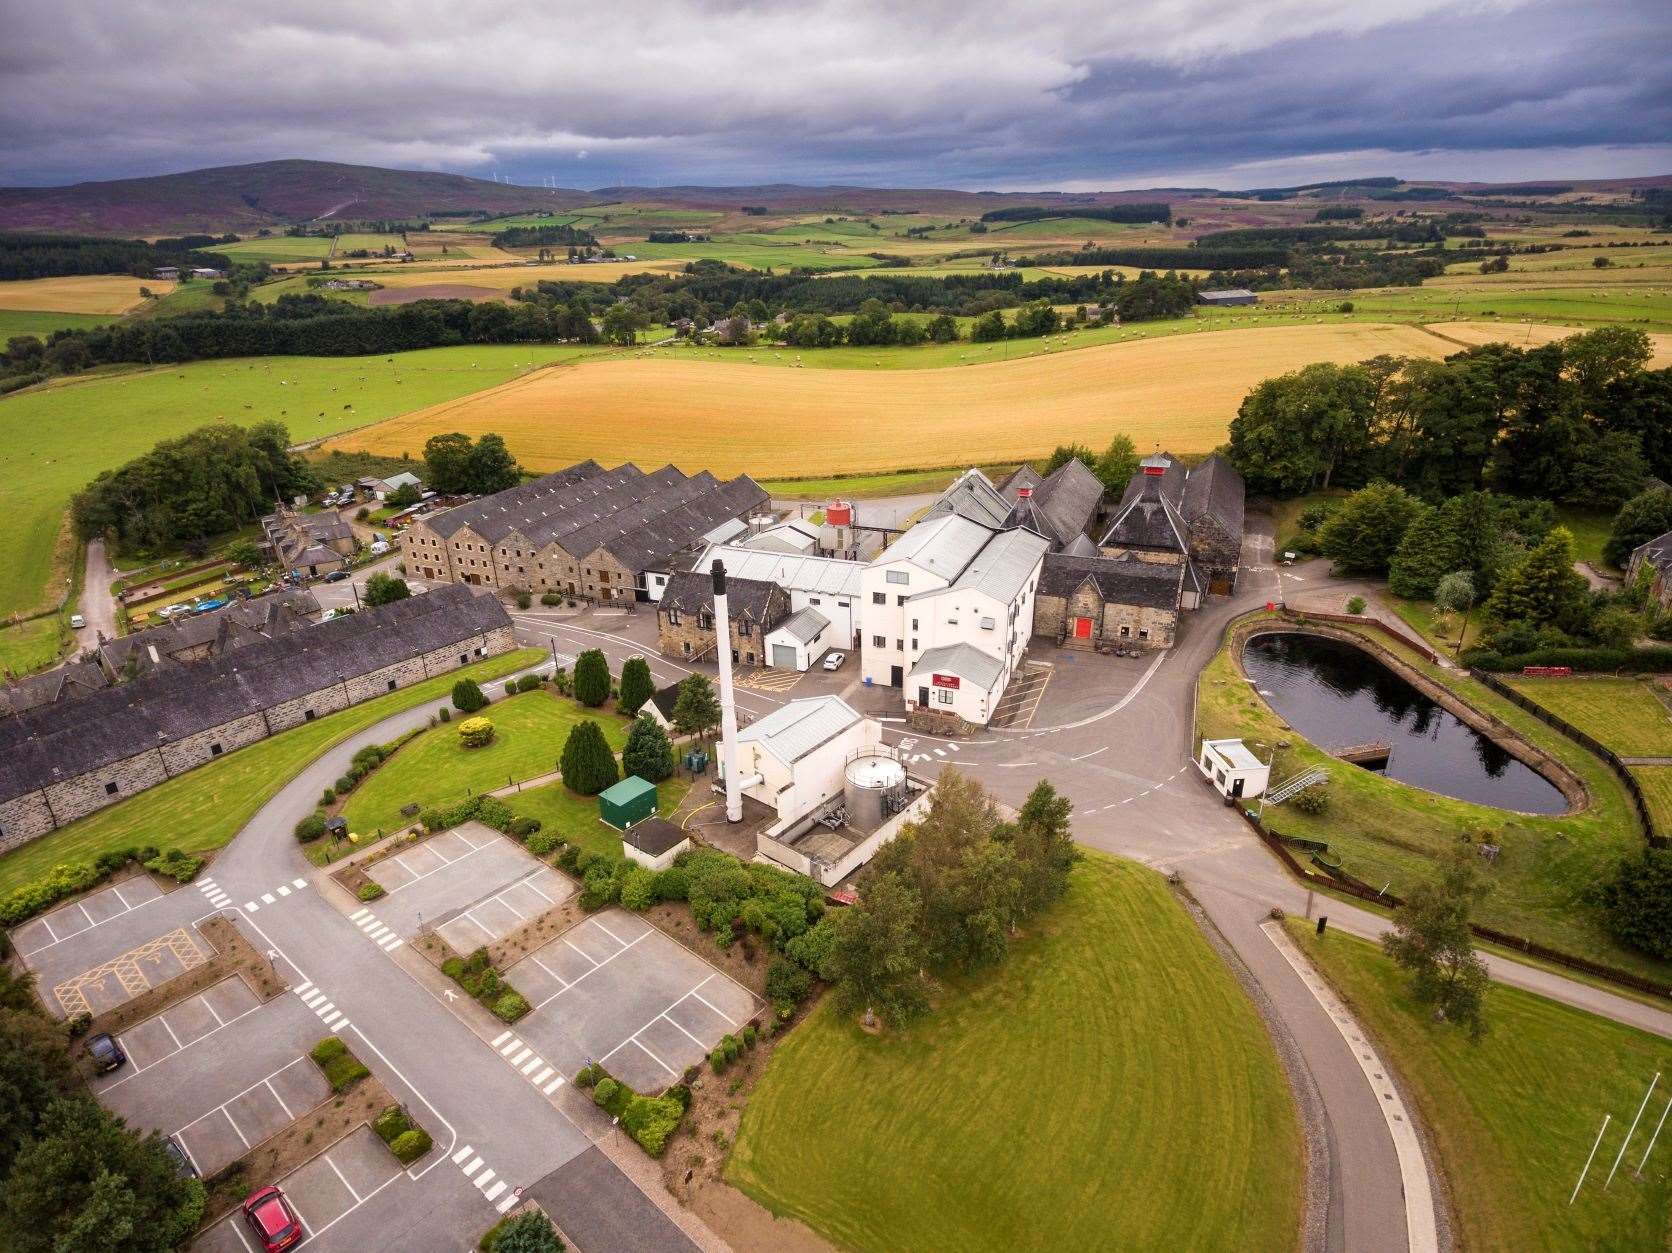 Cardhu Distillery at Knockando, one of 11 Diageo-owned distilleries awarded International Water Stewardship Standard certification as part of the Diageo Spey Catchment Group.